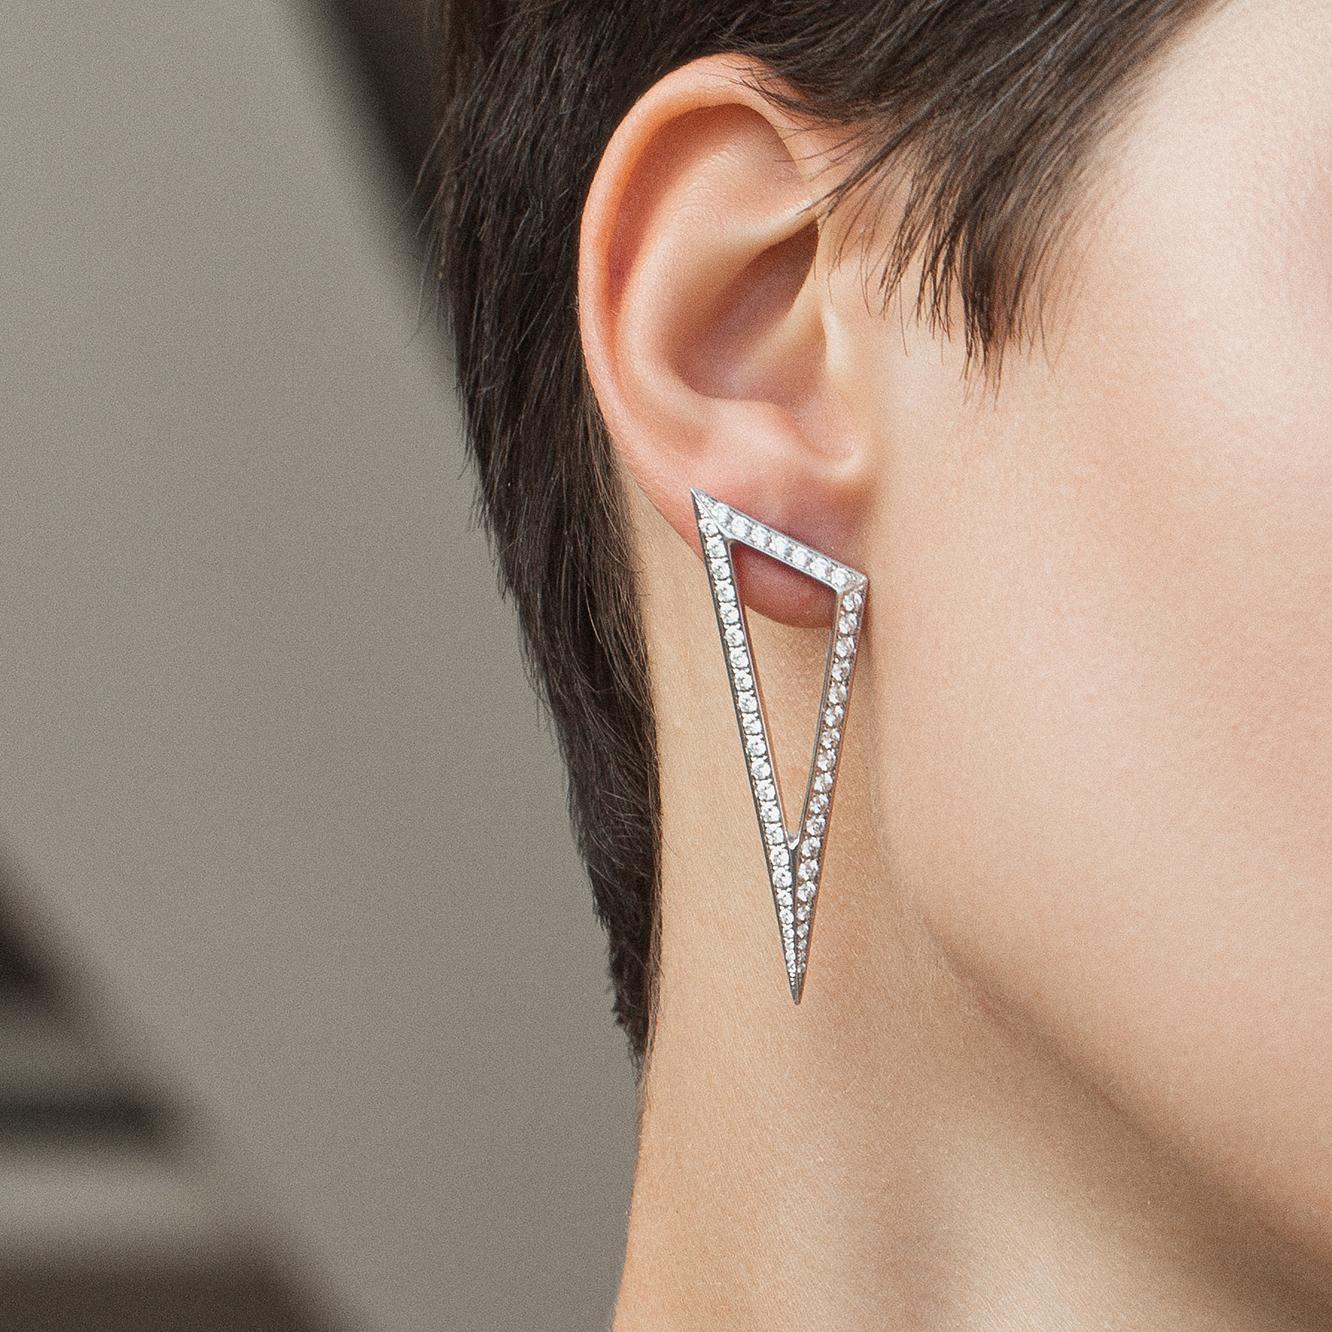 18kt white gold triangular earrings with diamonds from Ralph Masri's Modernist collection, inspired by mid-century Modernist architecture with an emphasis on minimalist shapes and silhouettes.

Available in yellow, rose or white gold.

Push backs